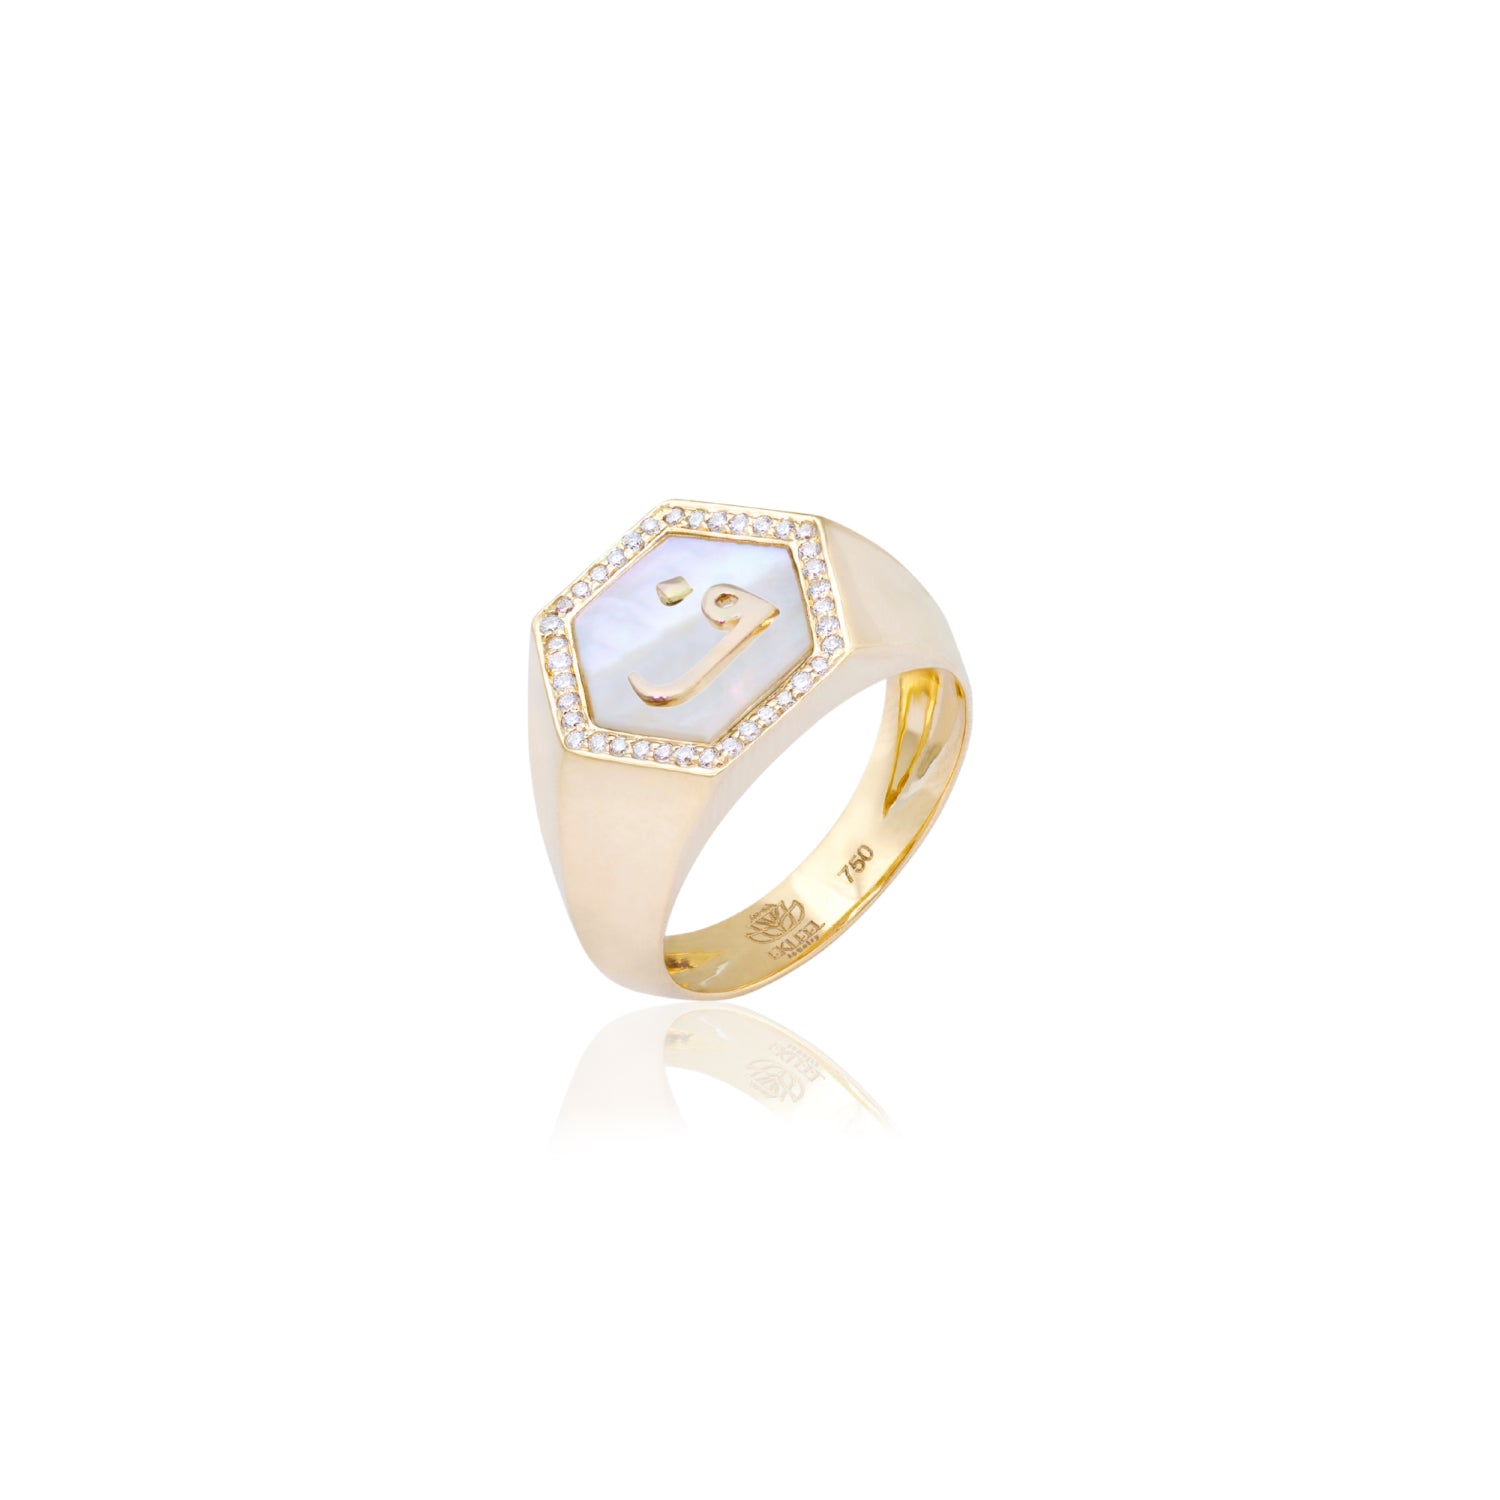 Qamoos 2.0 Letter ف White Mother of Pearl and Diamond Signet Ring in Yellow Gold